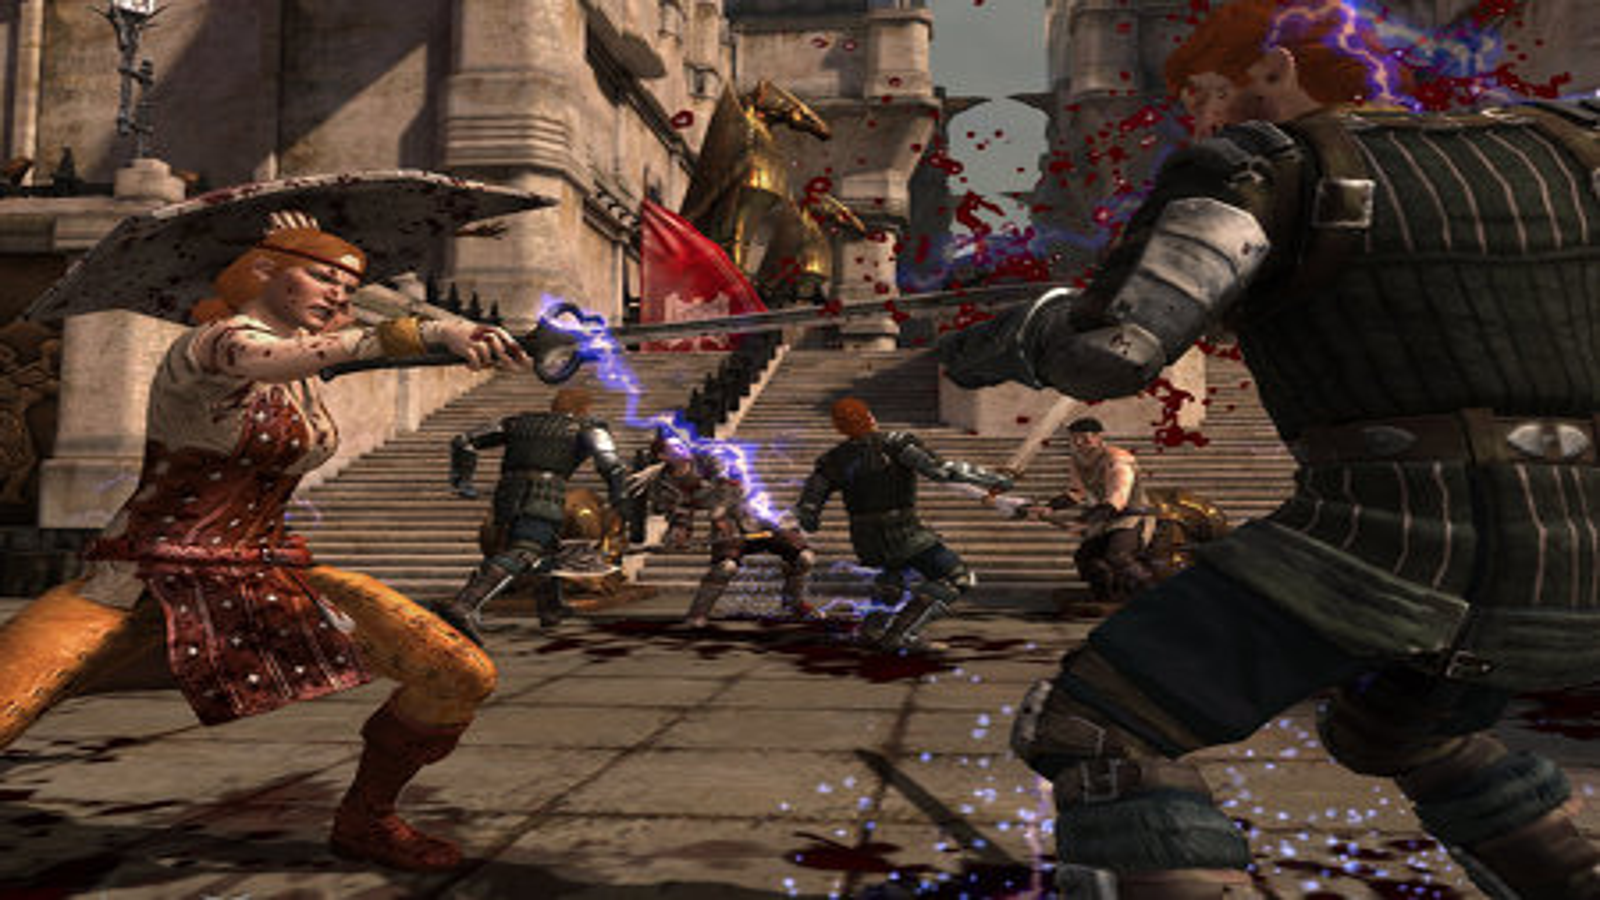 Review: Dragon Age II Mark of the Assassin DLC